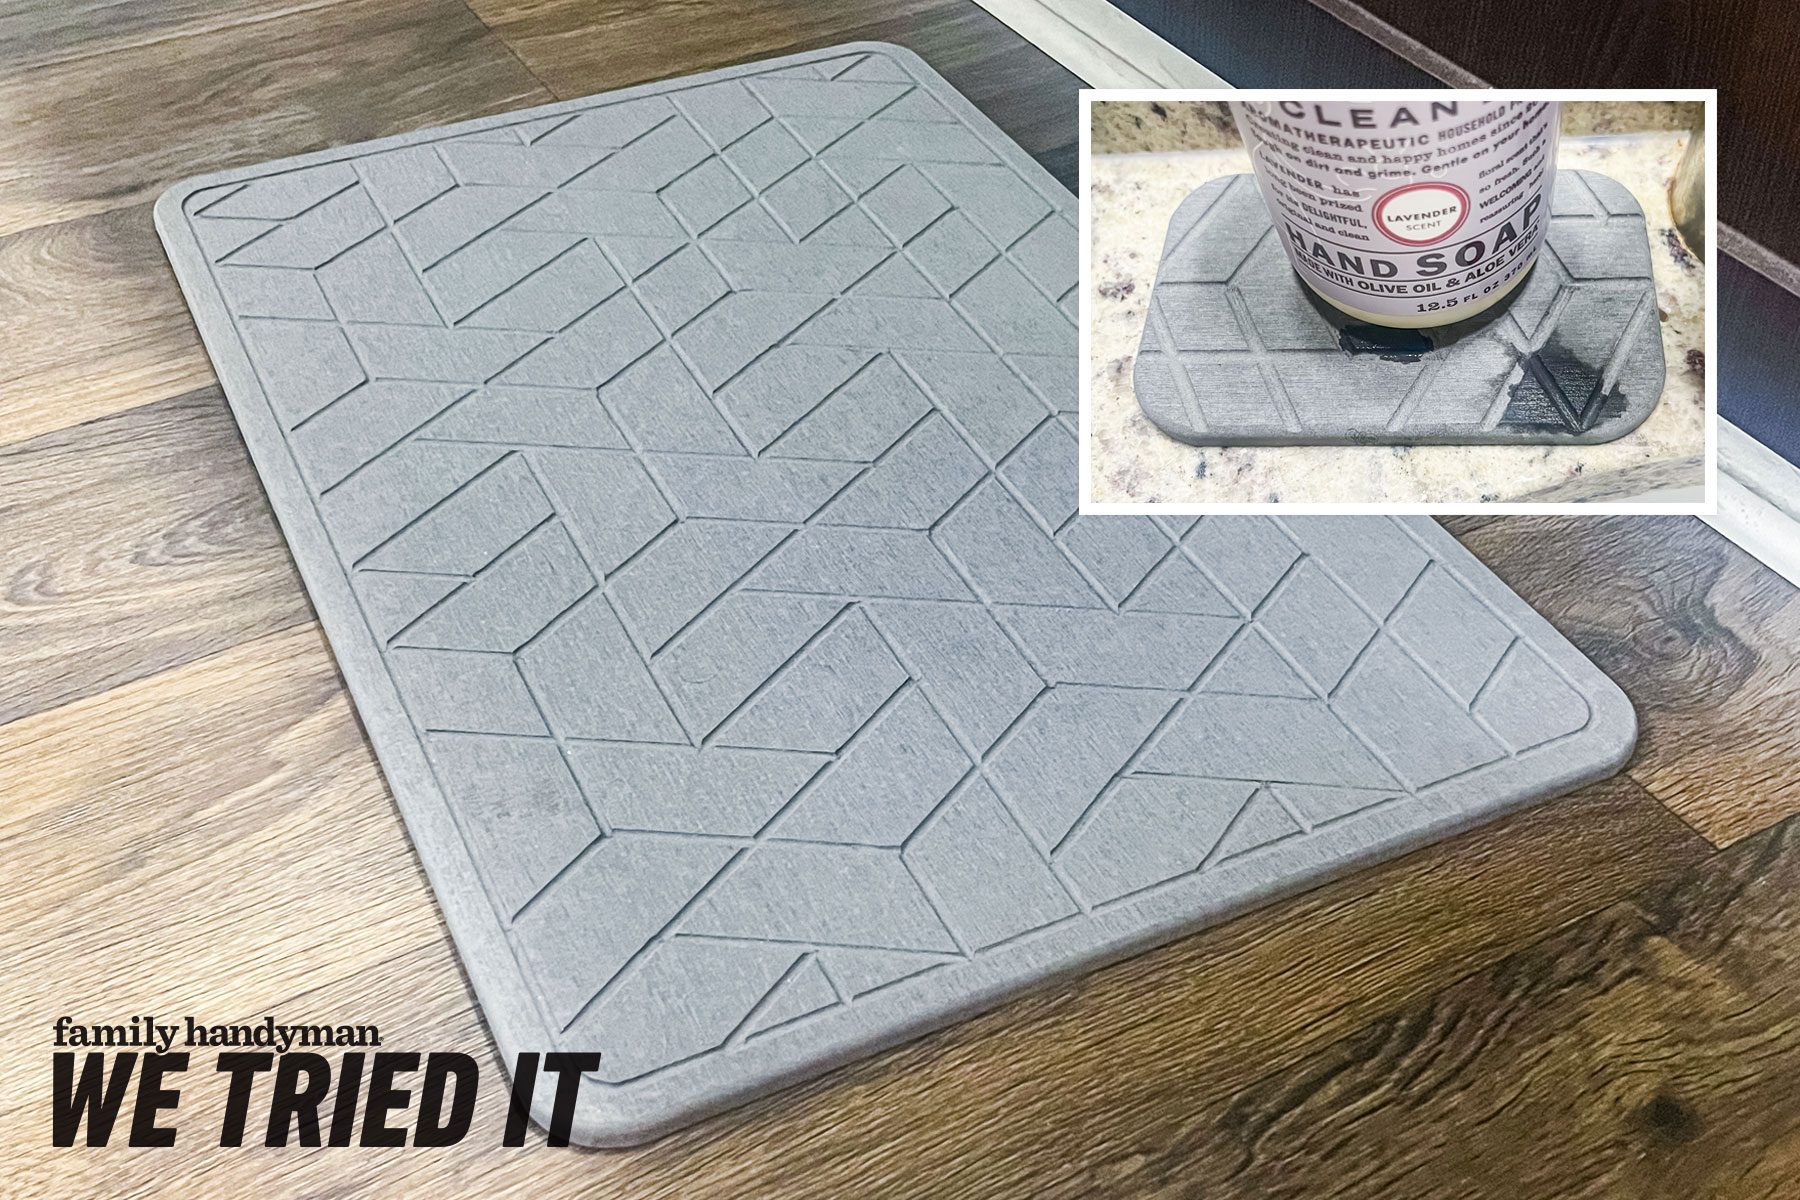 https://www.familyhandyman.com/wp-content/uploads/2023/07/FHM-We-Tried-It-5-Best-Stone-Bath-Mats_Me-Mother-Earth-Stone-Bath-Mat_Anthony-O-Reilly-for-Family-Handyman_IMG-7148_IMG-7156_KSedit.jpg?fit=700%2C467